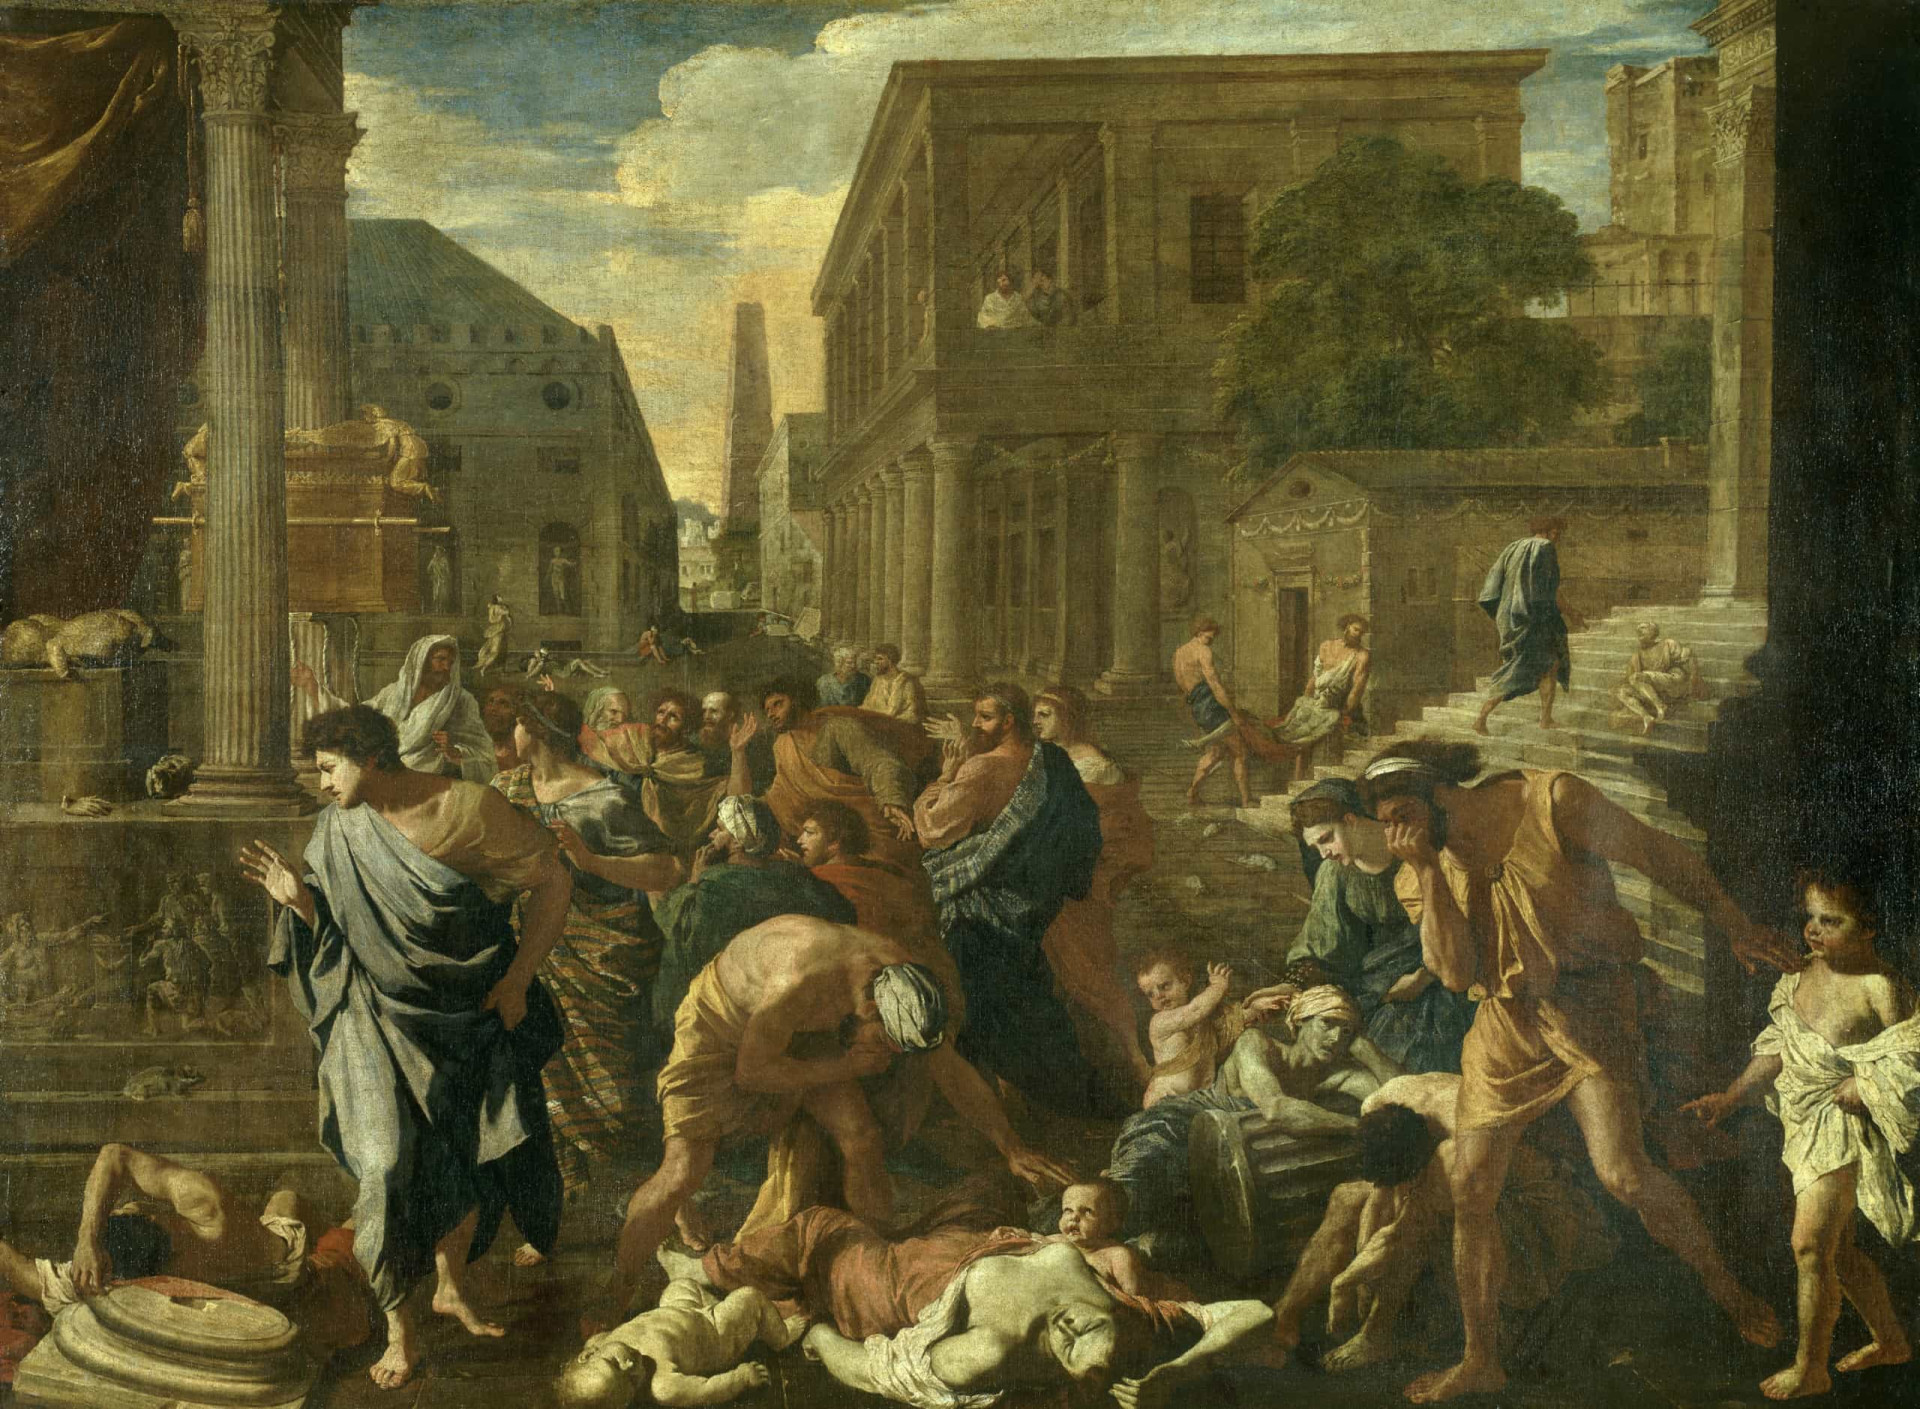 <p>But the worst was yet to come. The people of Ashdod were struck down by God and afflicted by plague (pictured) for the sacrilege of allowing the Ark to be placed in the temple. Elsewhere, a scourge of boils was visited upon the people of Gath and of Ekron. The Ark is quickly removed from the temple.</p><p><a href="https://www.msn.com/en-ph/community/channel/vid-7xx8mnucu55yw63we9va2gwr7uihbxwc68fxqp25x6tg4ftibpra?cvid=94631541bc0f4f89bfd59158d696ad7e">Follow us and access great exclusive content every day</a></p>